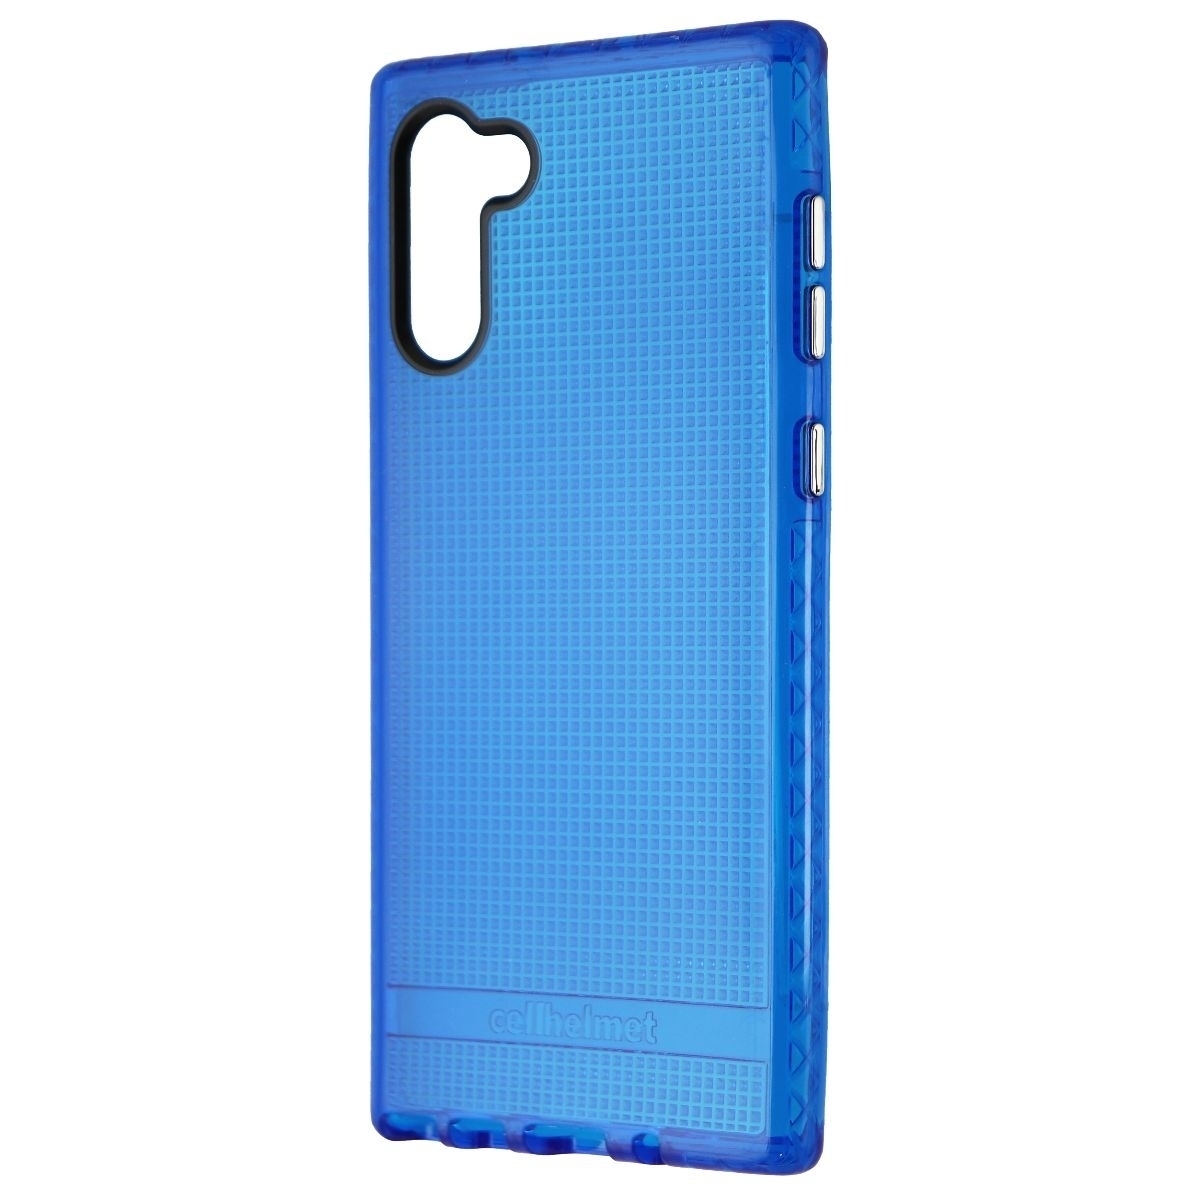 Cellhelmet - Altitude X Pro Series - Protective Case For Galaxy Note 10 - Blue